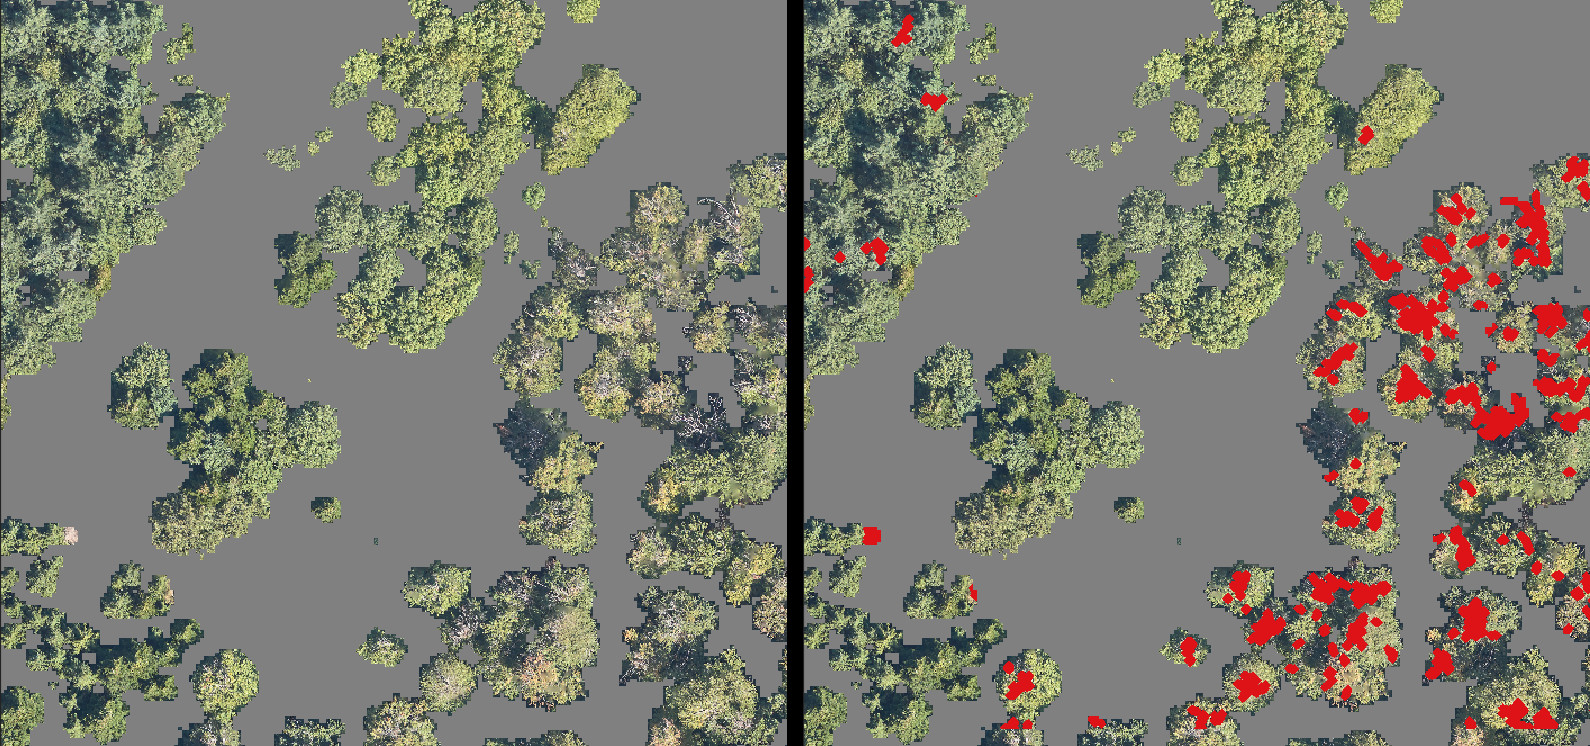 Results produced by the RGB filter for the detection of dead branches